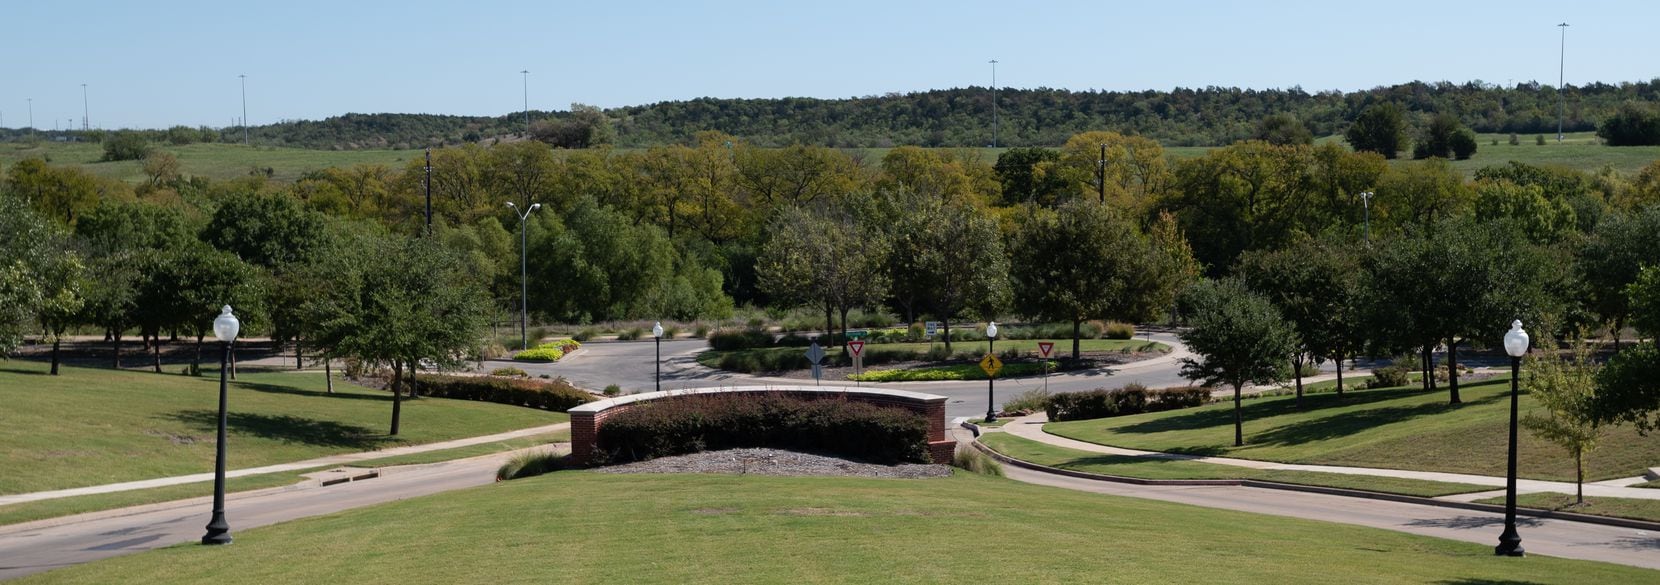 At the entrance to Capella Park in Dallas, off South Merrifield Road, traffic circles...